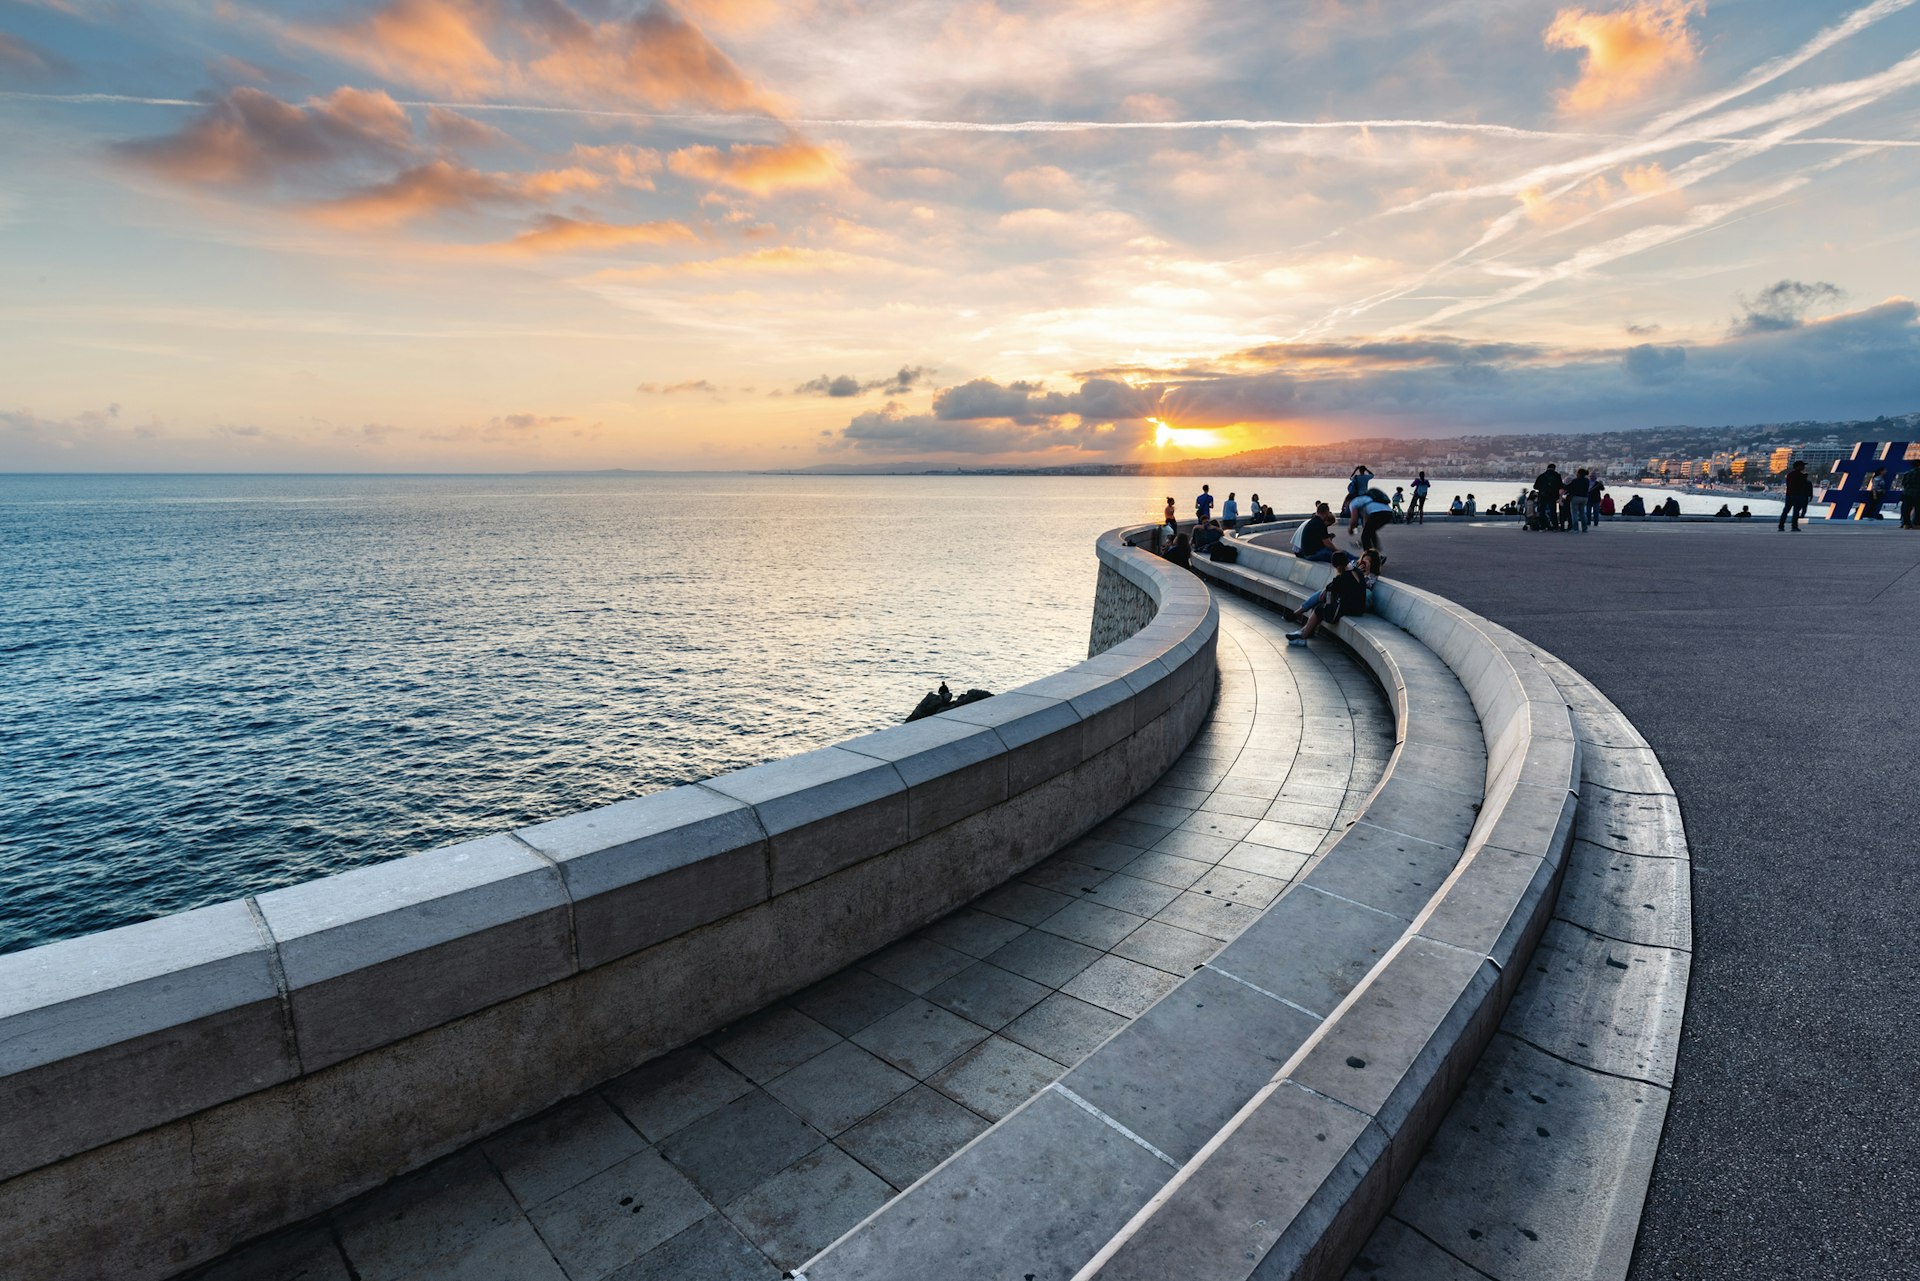 A waterfront promenade at sunset, Nice, France, with people in silhouette as the sun sets in the distance